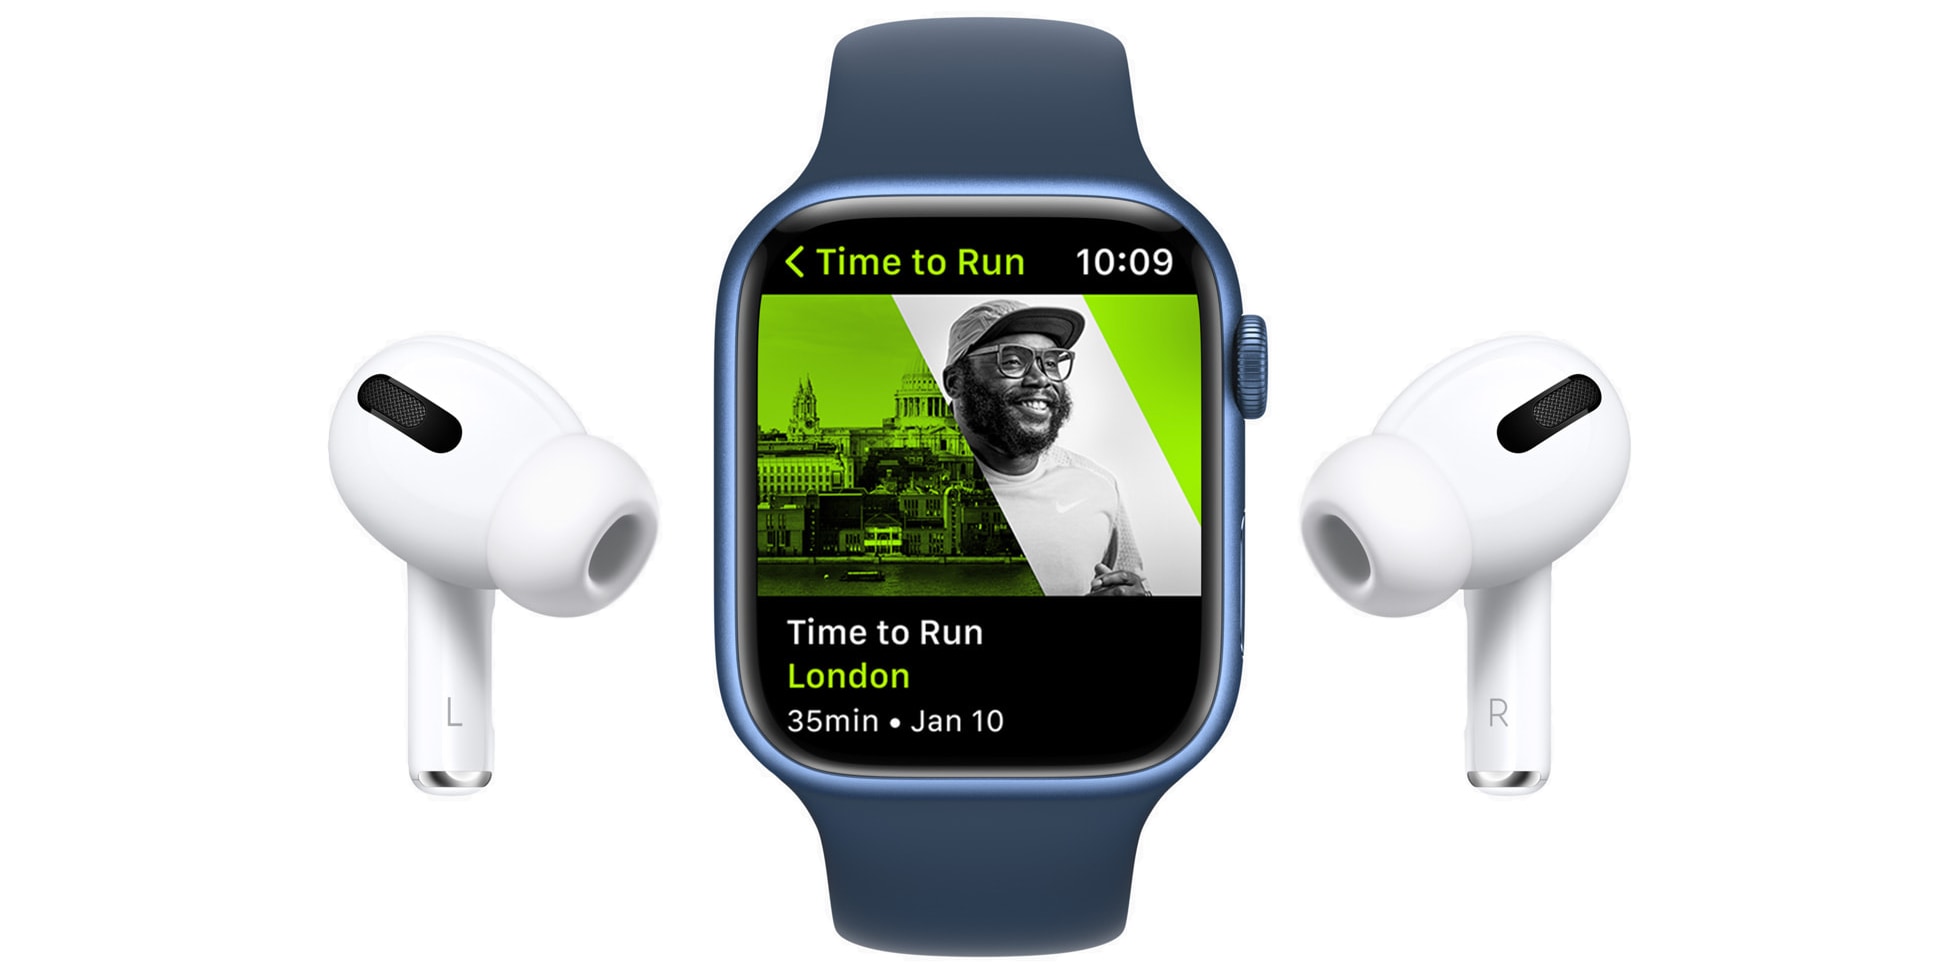 Promotional image showing a Time to Run episode featuring London on Fitness+ on Apple Watch